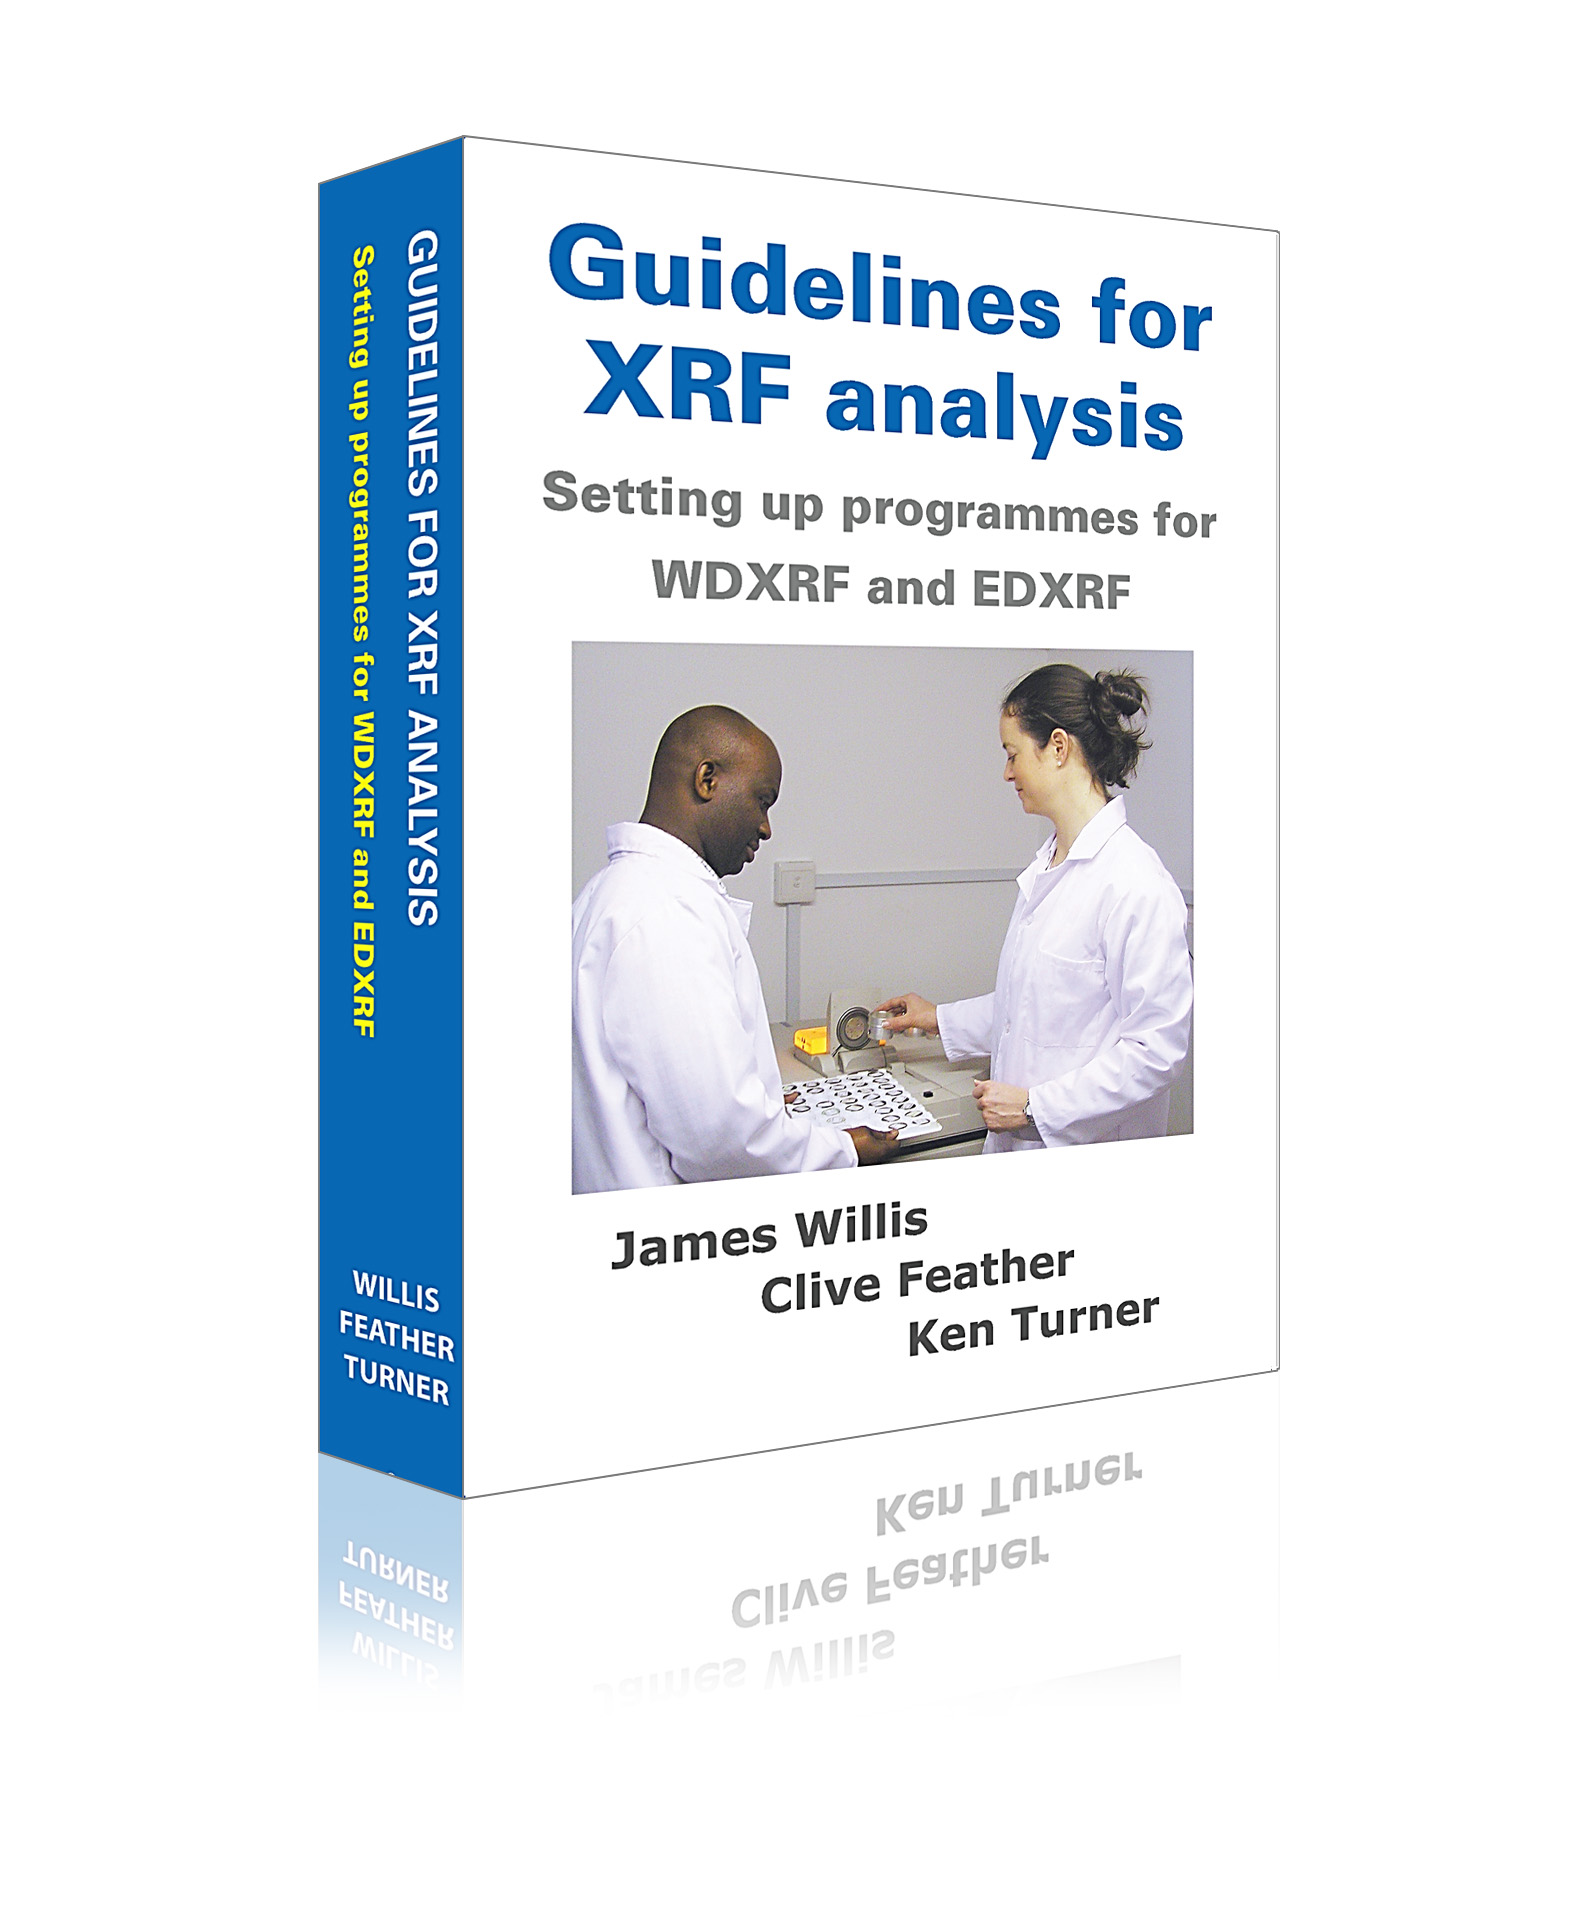 Gudelines for XRF Analysis